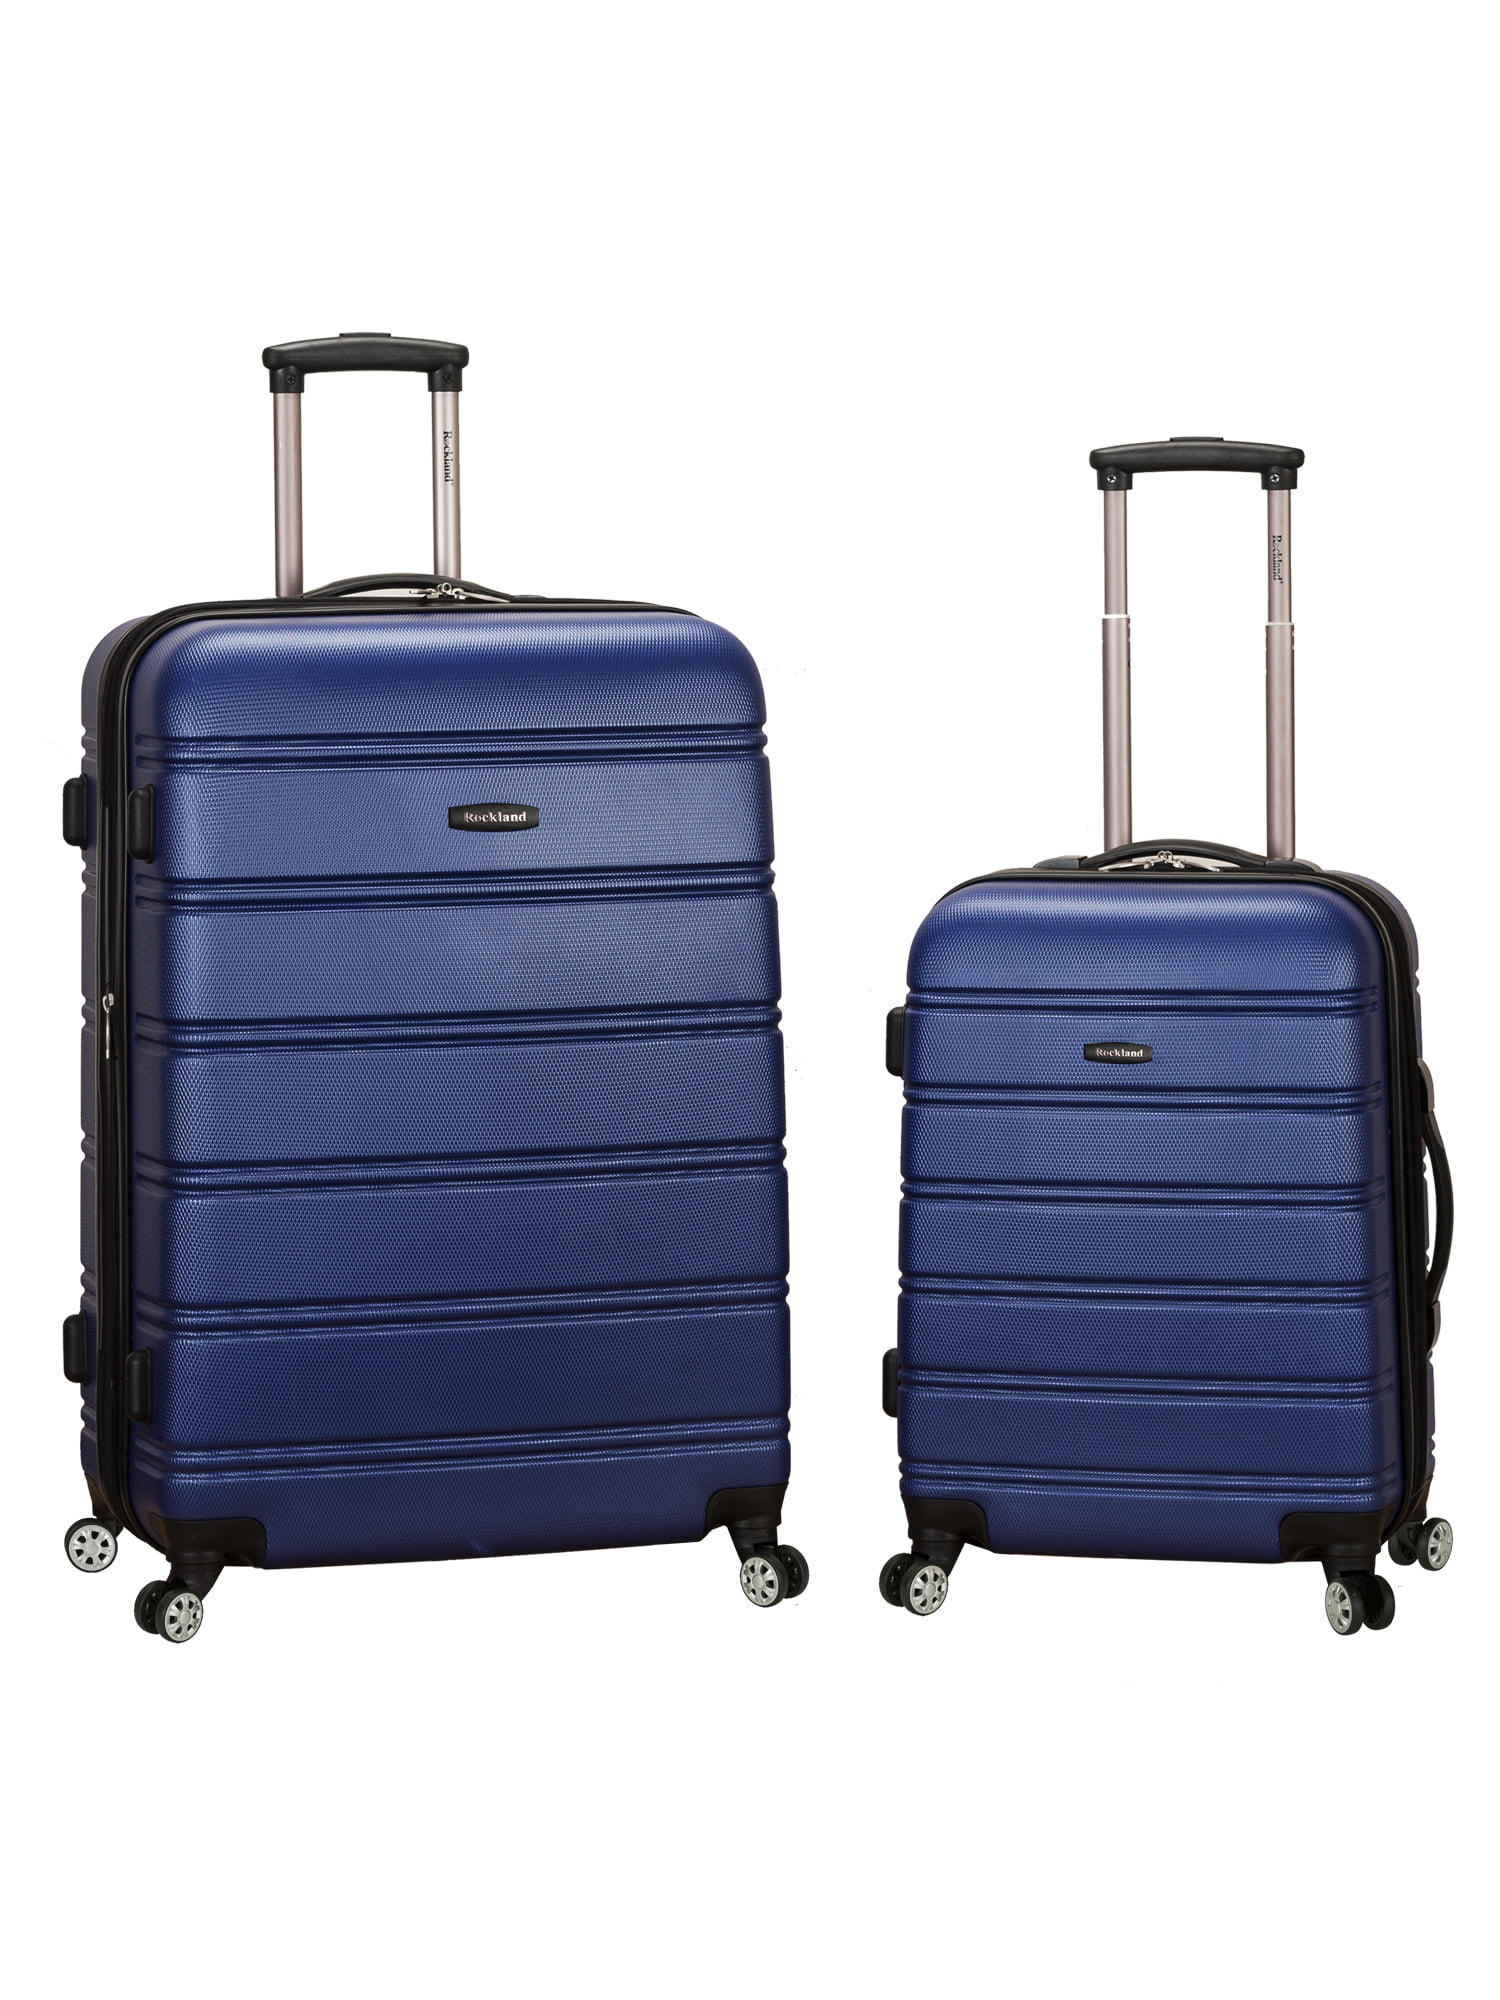 Hard-shell carry-on luggage